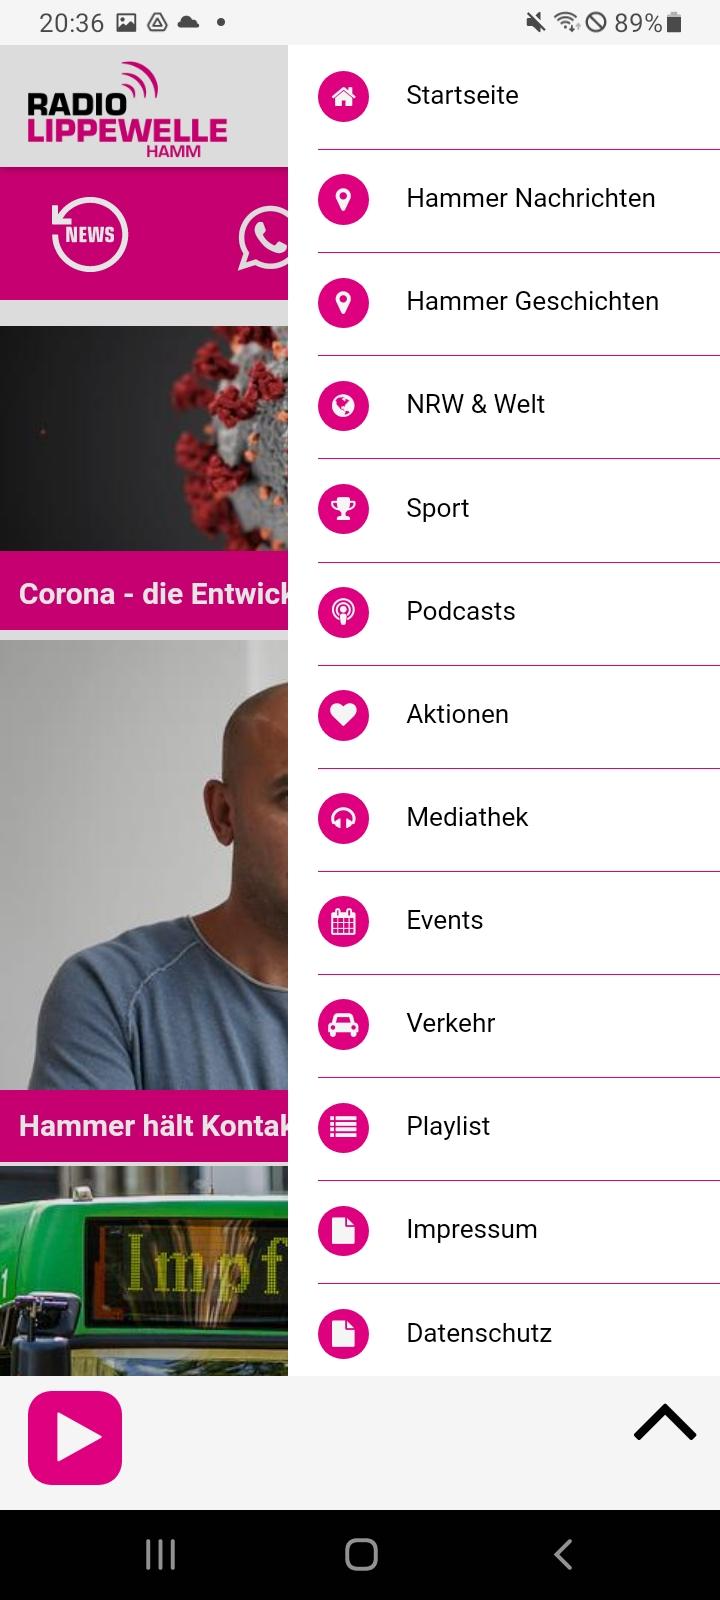 Radio Lippewelle Hamm for Android - APK Download